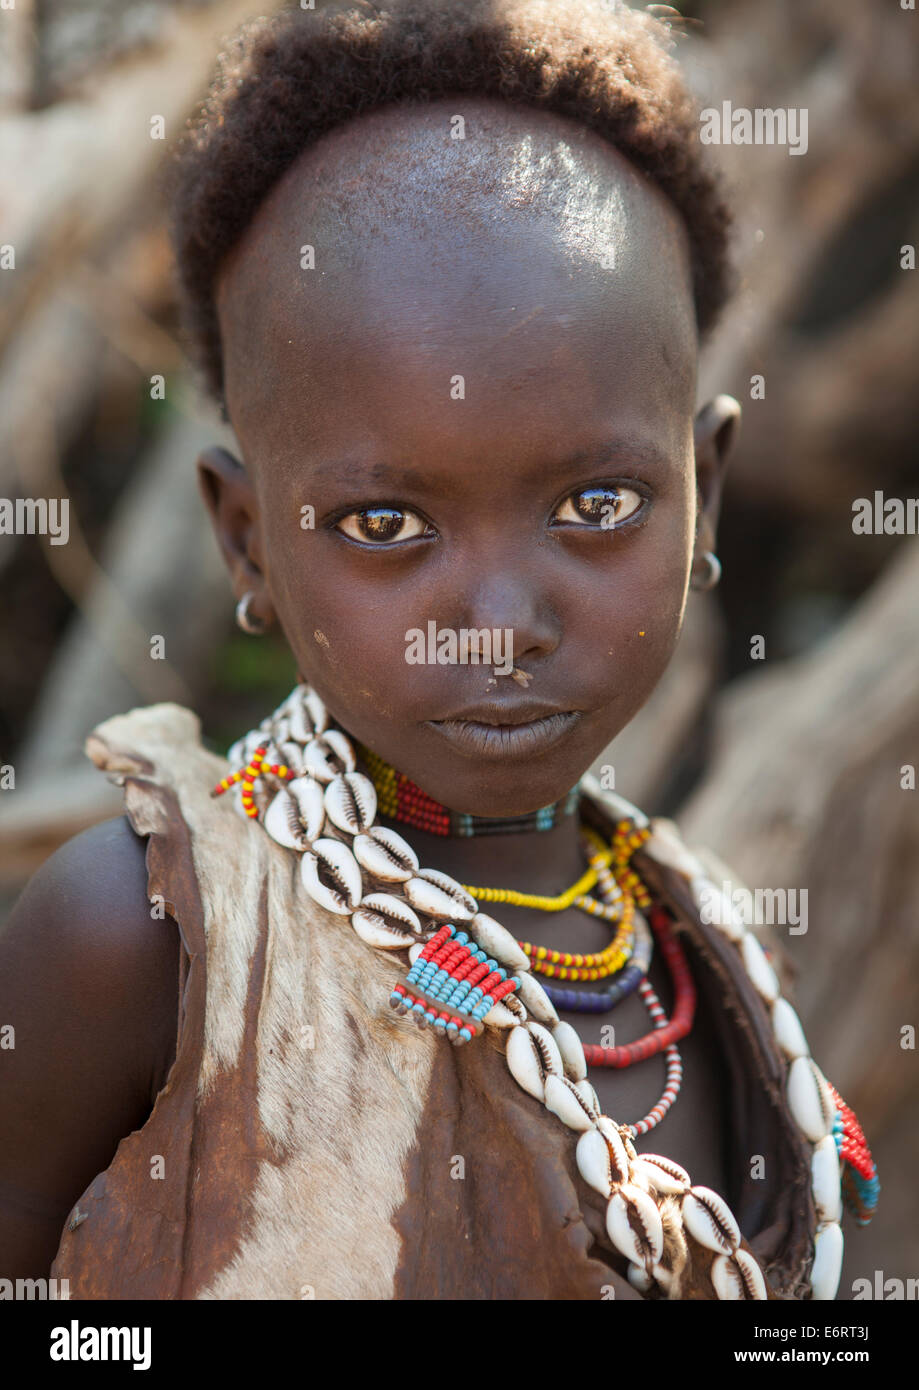 Litte Hamer Girl Tribe With Head Half Shaved In Traditional Outfit, Turmi, Omo Valley, Ethiopia Stock Photo